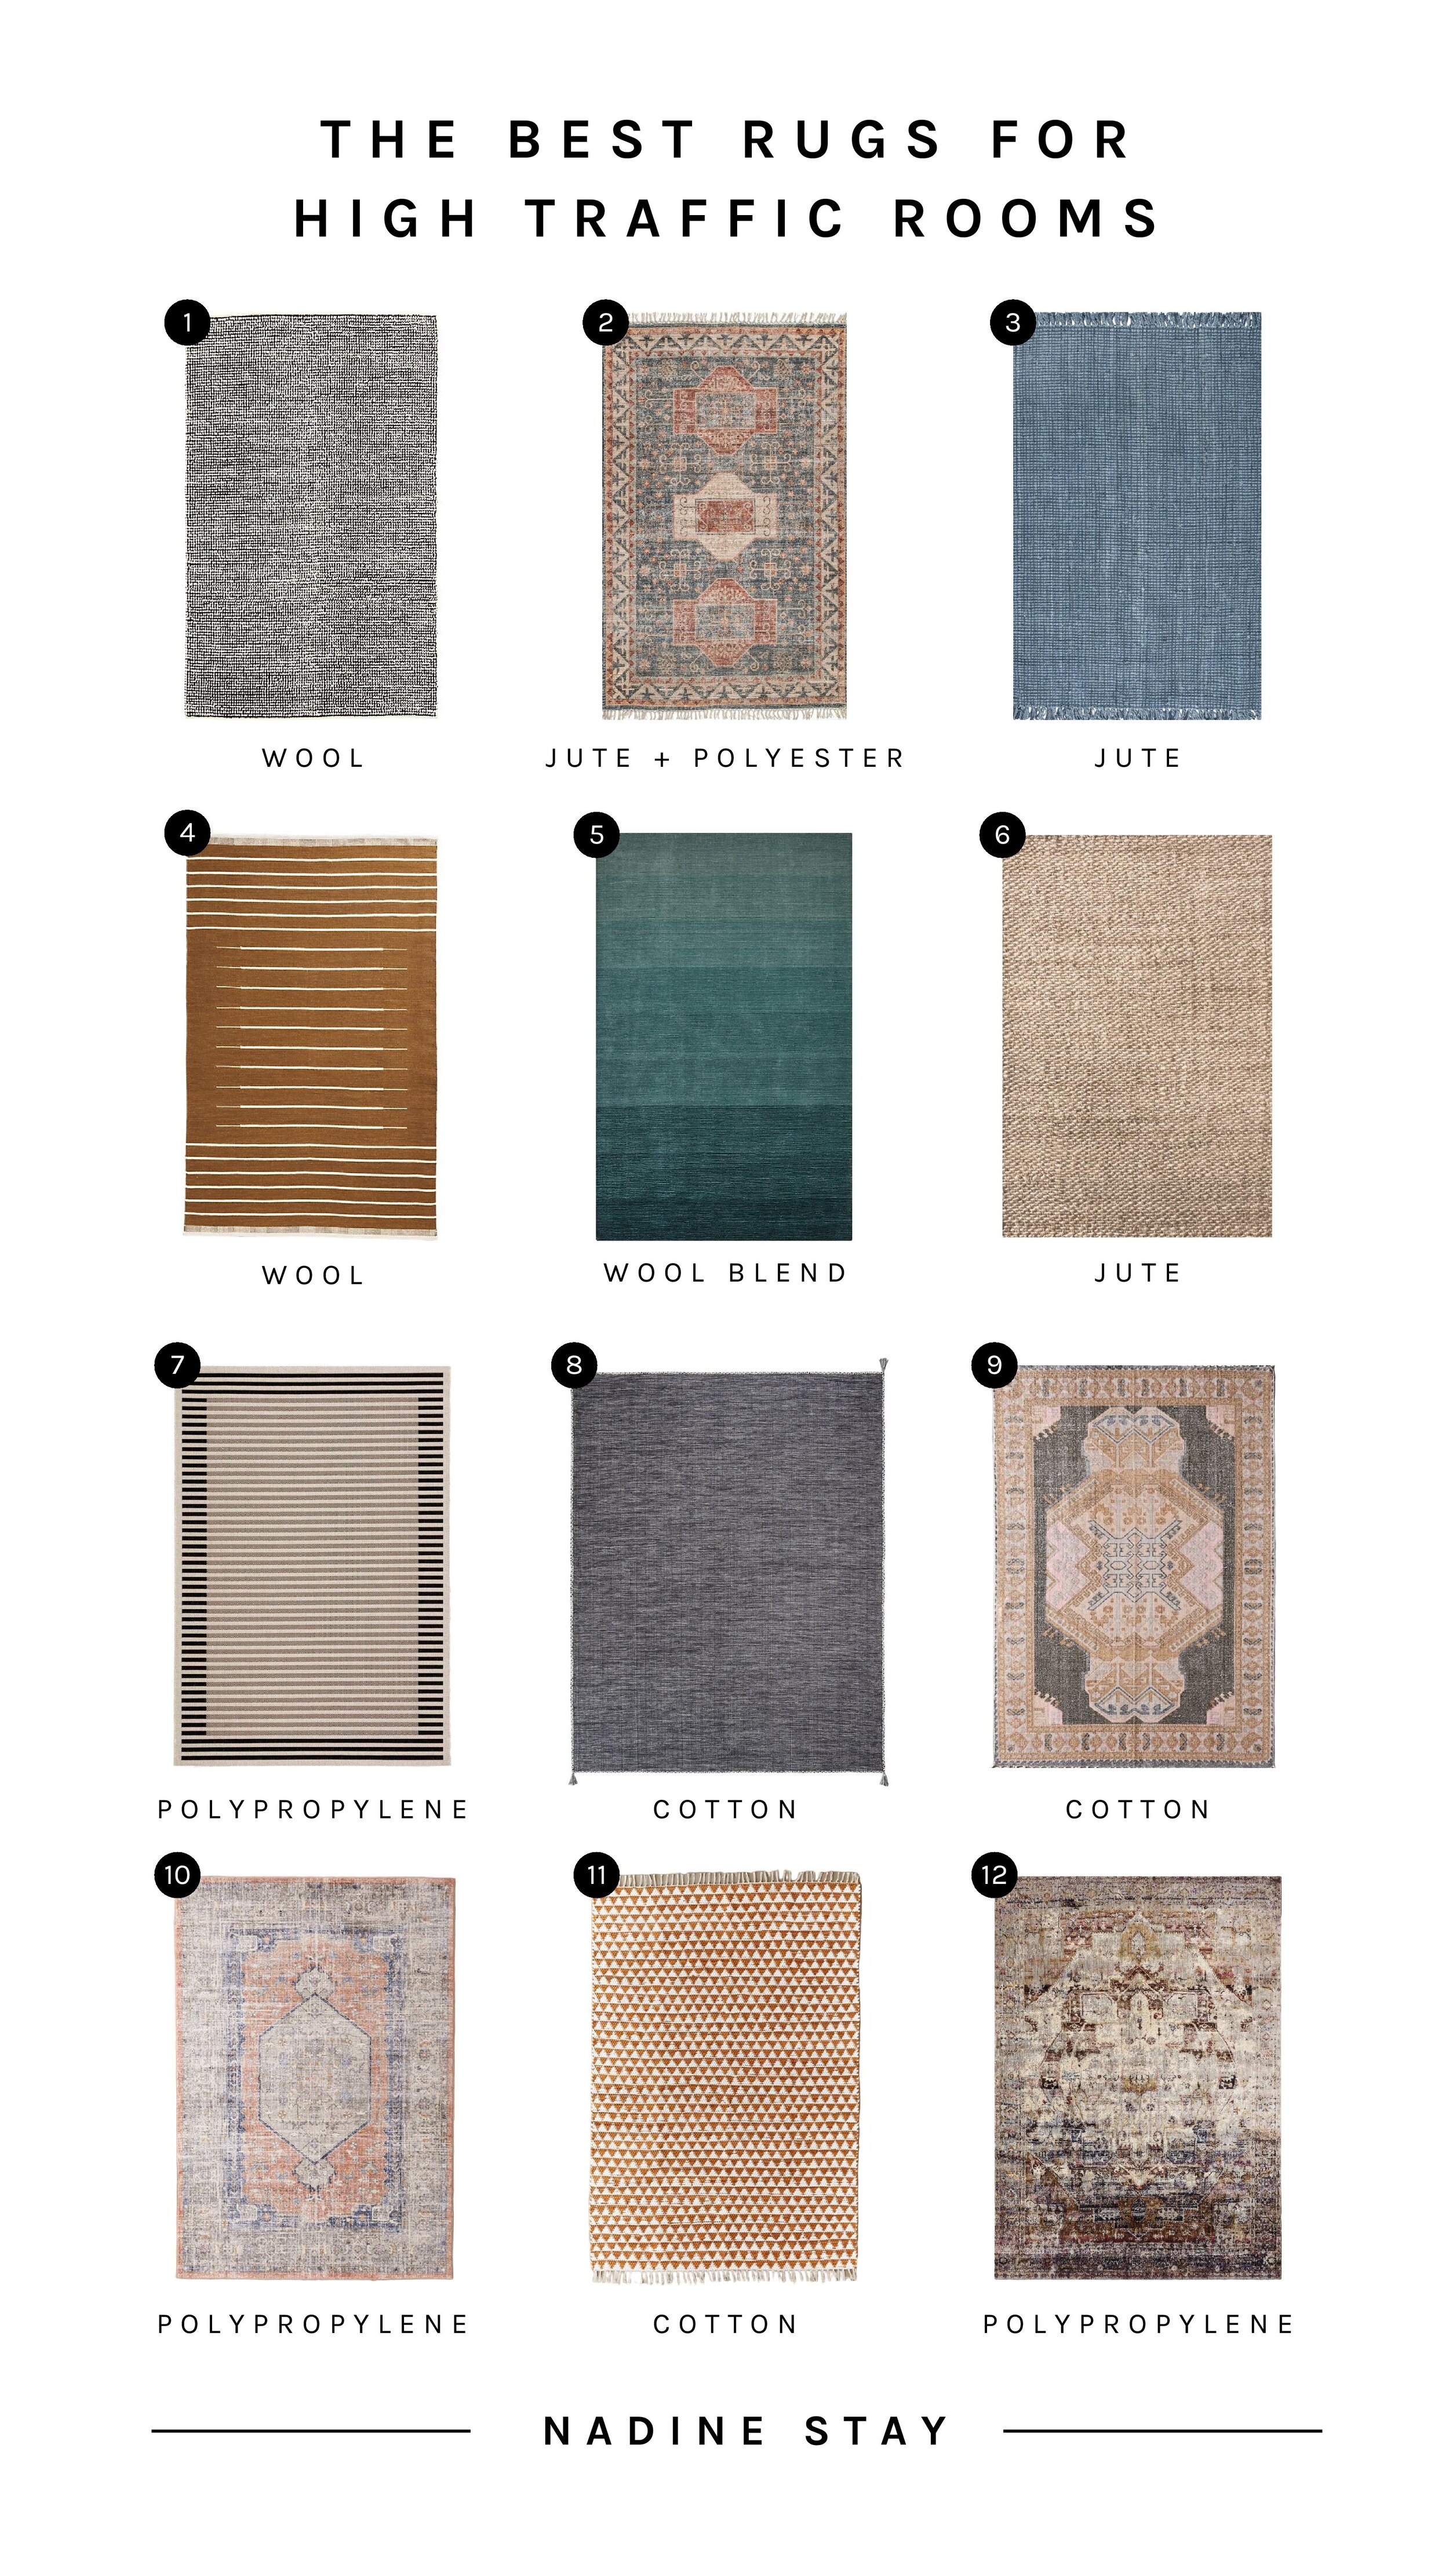 Worst Rugs For High Traffic Areas, Softest Rug Material